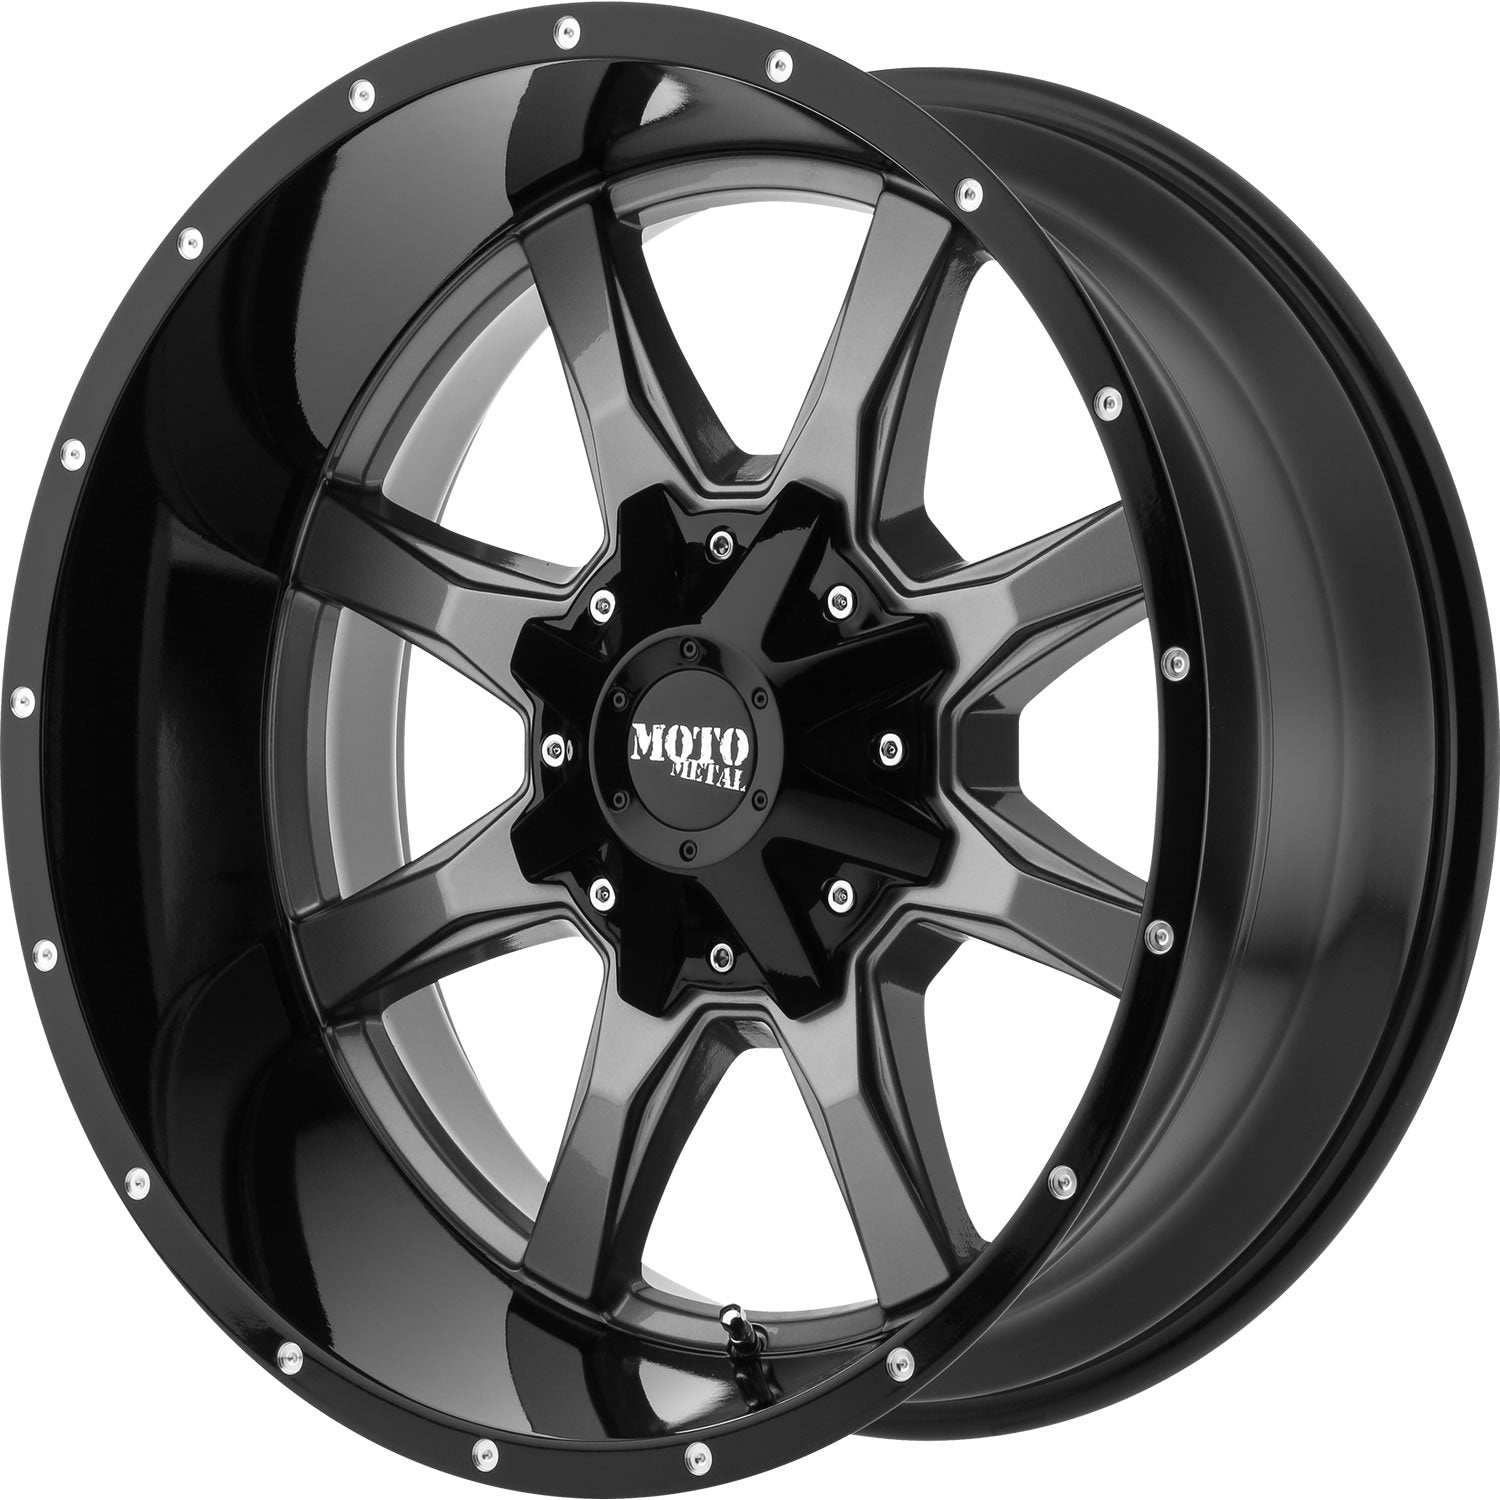 Moto Metal MO970 20x9 18 6x120/6x139.7 (6x5.5) Gray and Black - Tires and Engine Performance